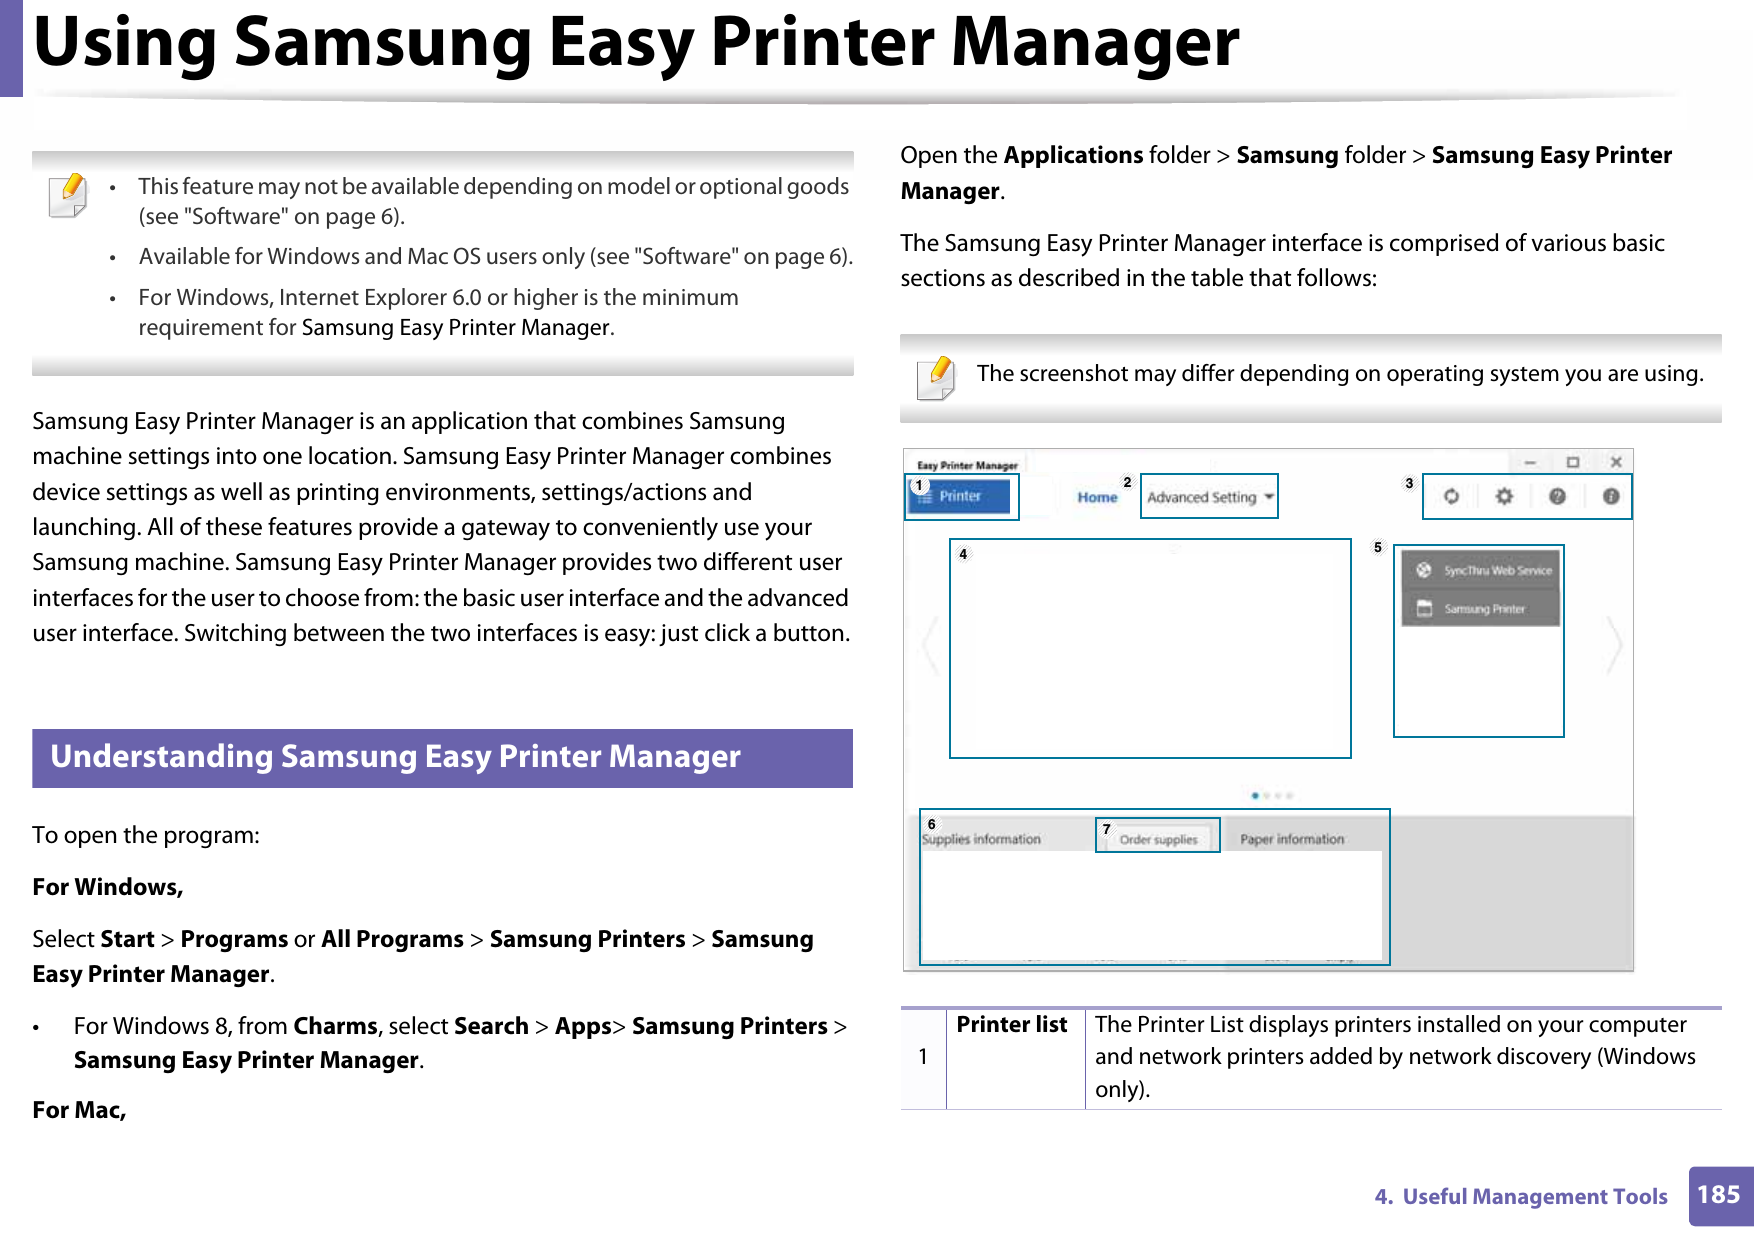 1854.  Useful Management ToolsUsing Samsung Easy Printer Manager  • This feature may not be available depending on model or optional goods (see &quot;Software&quot; on page 6).• Available for Windows and Mac OS users only (see &quot;Software&quot; on page 6).• For Windows, Internet Explorer 6.0 or higher is the minimum requirement for Samsung Easy Printer Manager. Samsung Easy Printer Manager is an application that combines Samsung machine settings into one location. Samsung Easy Printer Manager combines device settings as well as printing environments, settings/actions and launching. All of these features provide a gateway to conveniently use your Samsung machine. Samsung Easy Printer Manager provides two different user interfaces for the user to choose from: the basic user interface and the advanced user interface. Switching between the two interfaces is easy: just click a button.4 Understanding Samsung Easy Printer ManagerTo open the program: For Windows,Select Start &gt; Programs or All Programs &gt; Samsung Printers &gt; Samsung Easy Printer Manager.• For Windows 8, from Charms, select Search &gt; Apps&gt; Samsung Printers &gt; Samsung Easy Printer Manager.For Mac,Open the Applications folder &gt; Samsung folder &gt; Samsung Easy Printer Manager.The Samsung Easy Printer Manager interface is comprised of various basic sections as described in the table that follows: The screenshot may differ depending on operating system you are using. 1Printer list The Printer List displays printers installed on your computer and network printers added by network discovery (Windows only).1564327